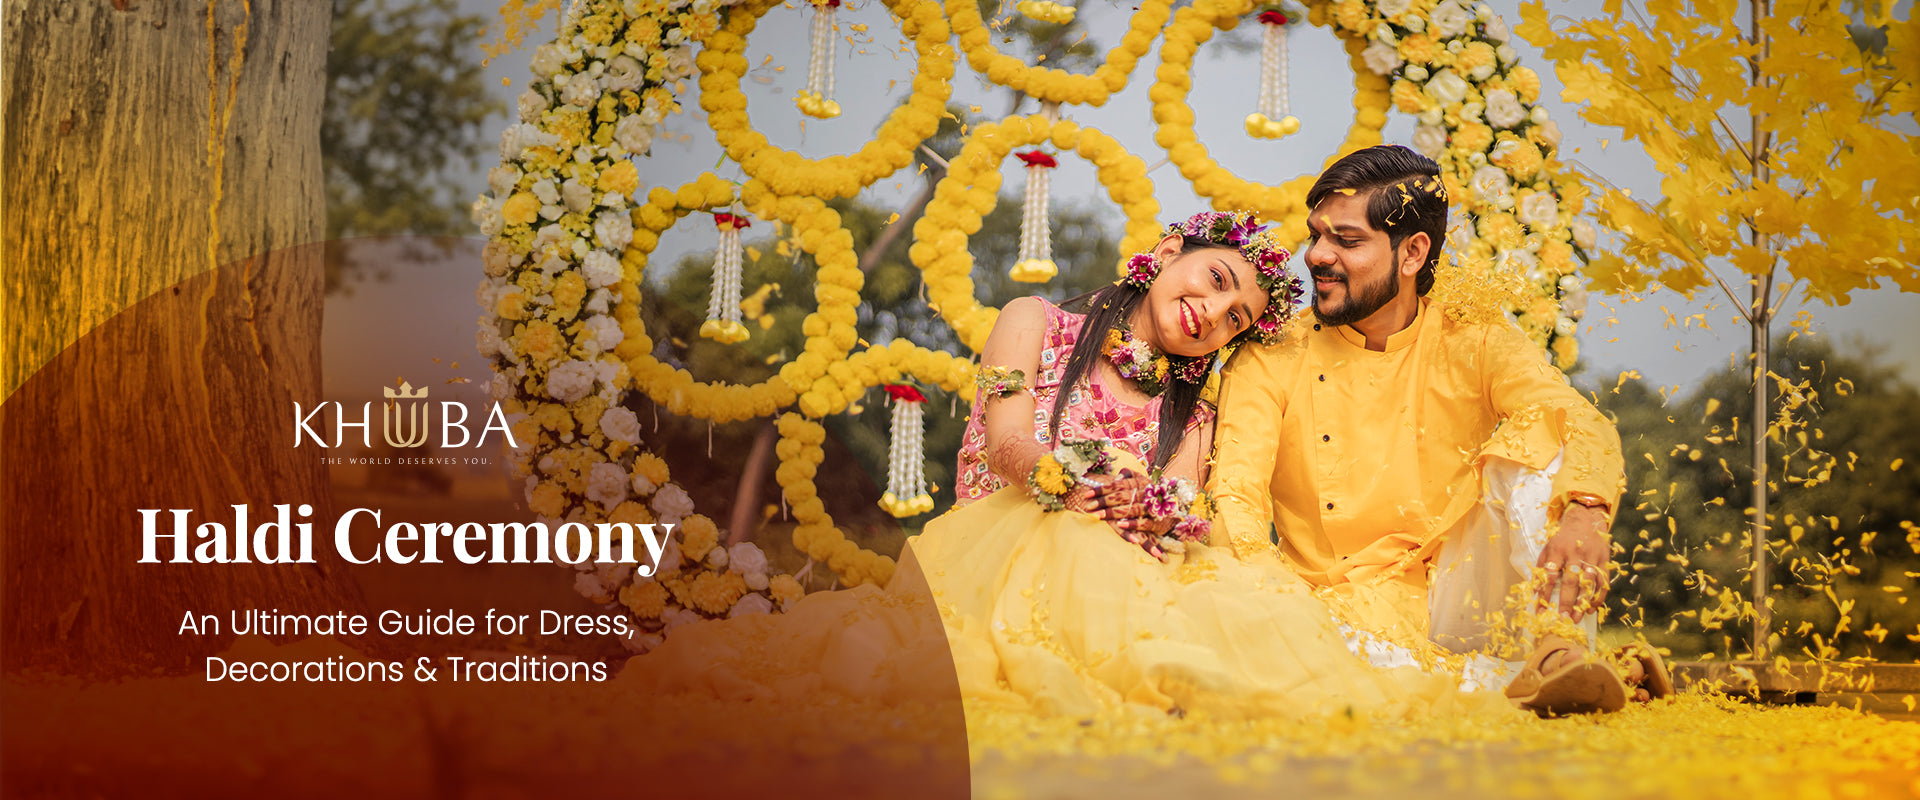 Haldi Ceremony: An Ultimate Guide for Dress, Decorations, and Traditions